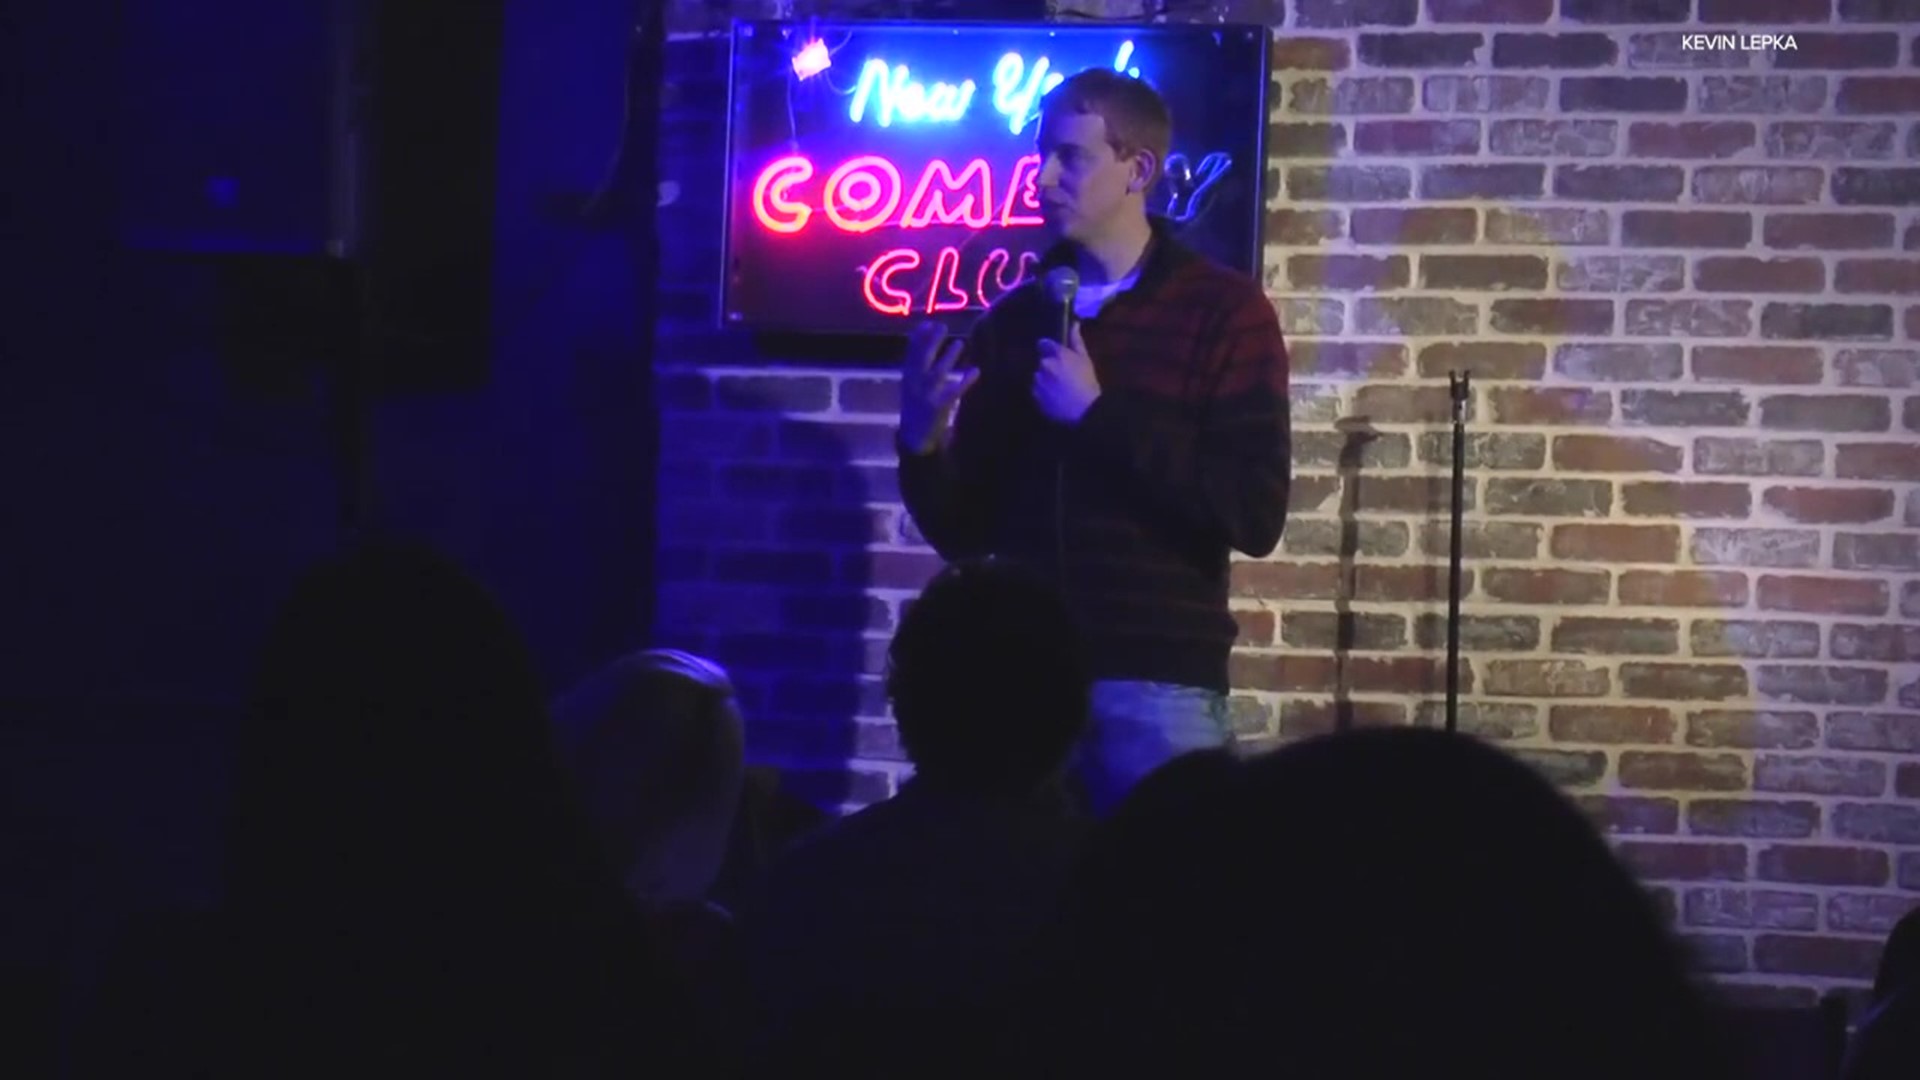 Many northeastern and central PA people work as standup comics, and they are understandably concerned.